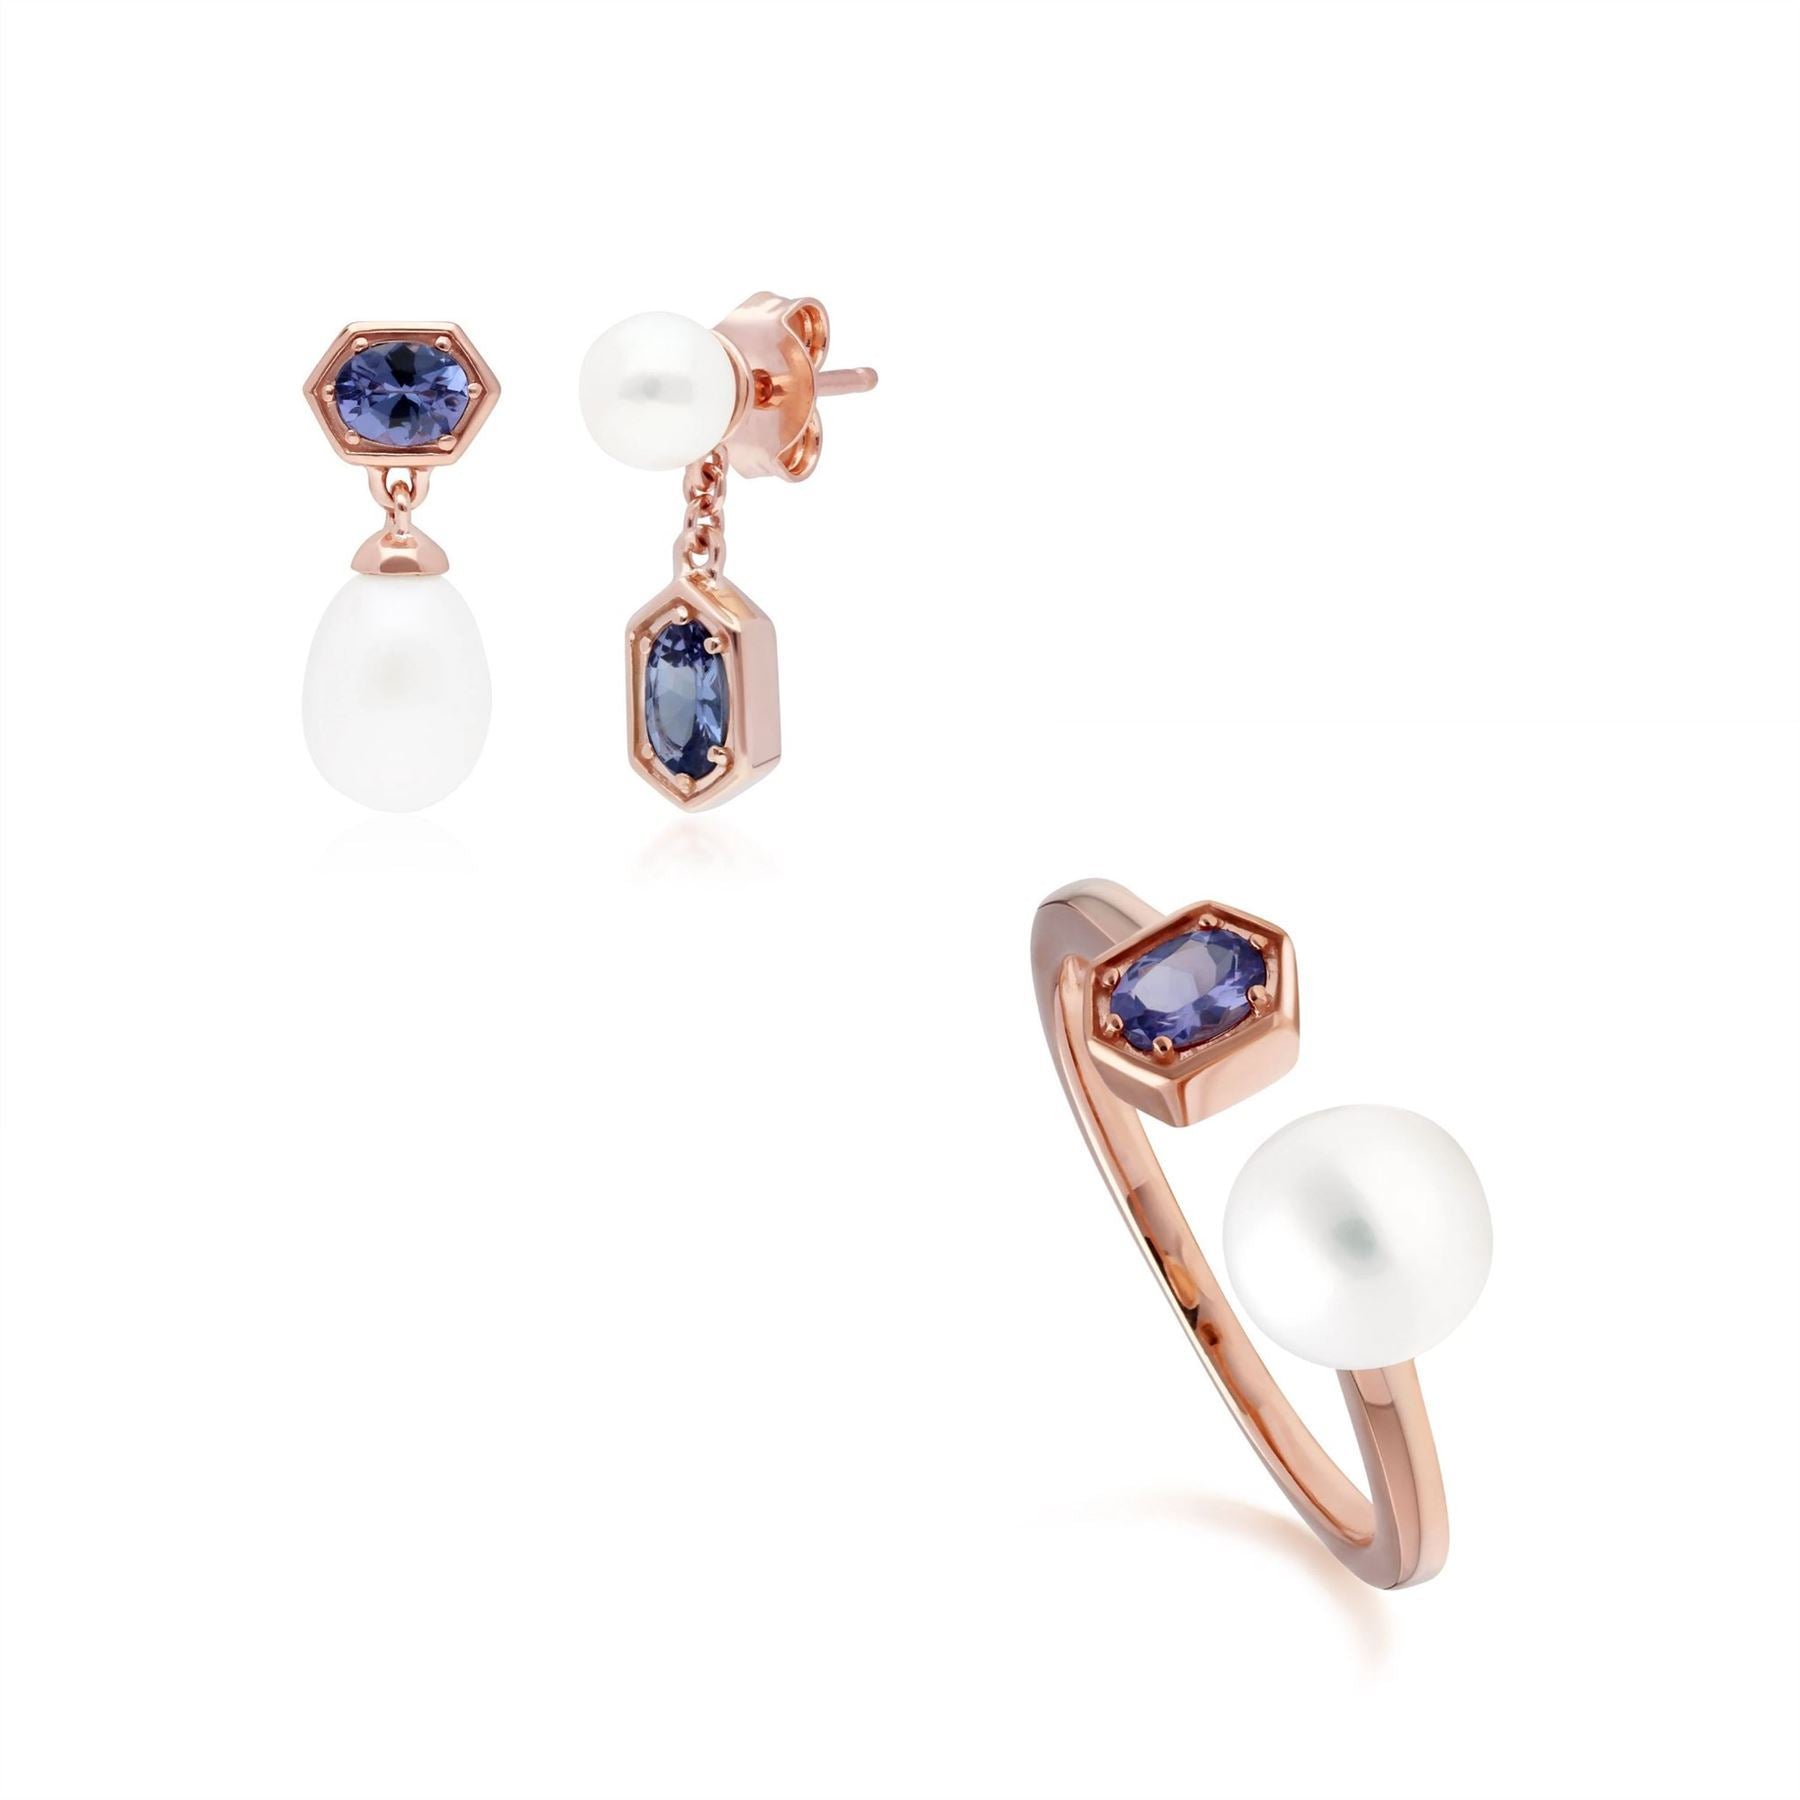 Modern Pearl & Tanzanite Earring & Ring Set in Rose Gold Plated Sterling Silver